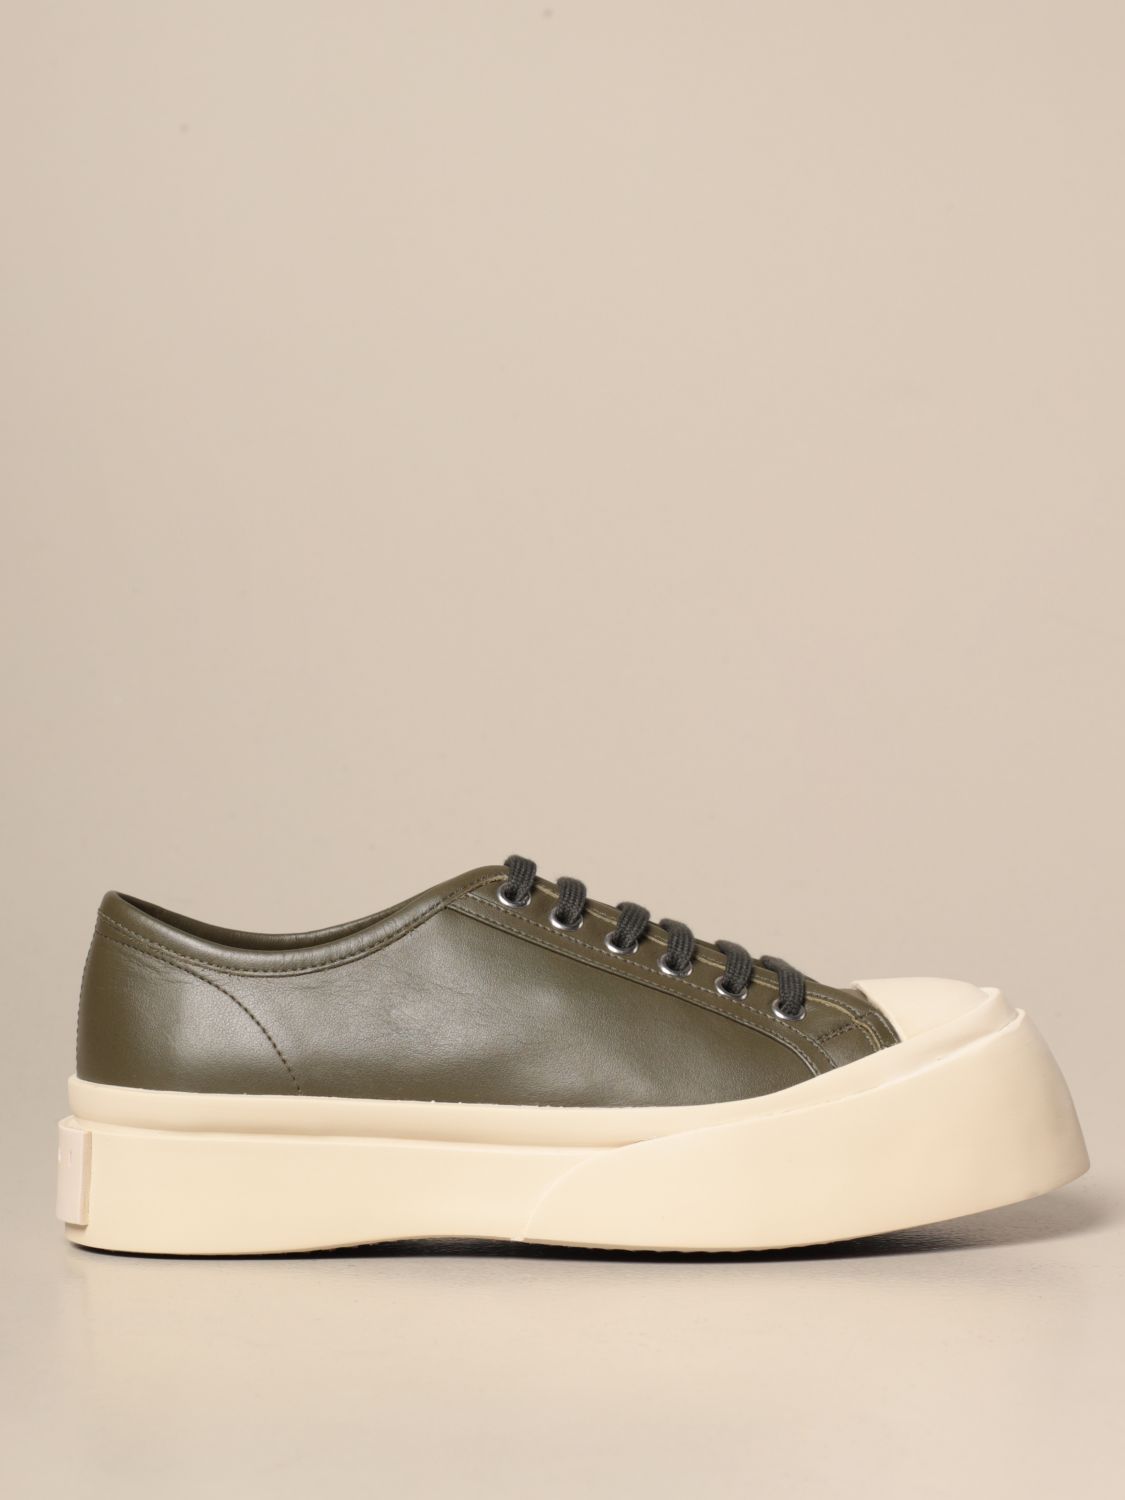 Marni Outlet: Pablo sneakers in nappa leather - Green | Marni sneakers